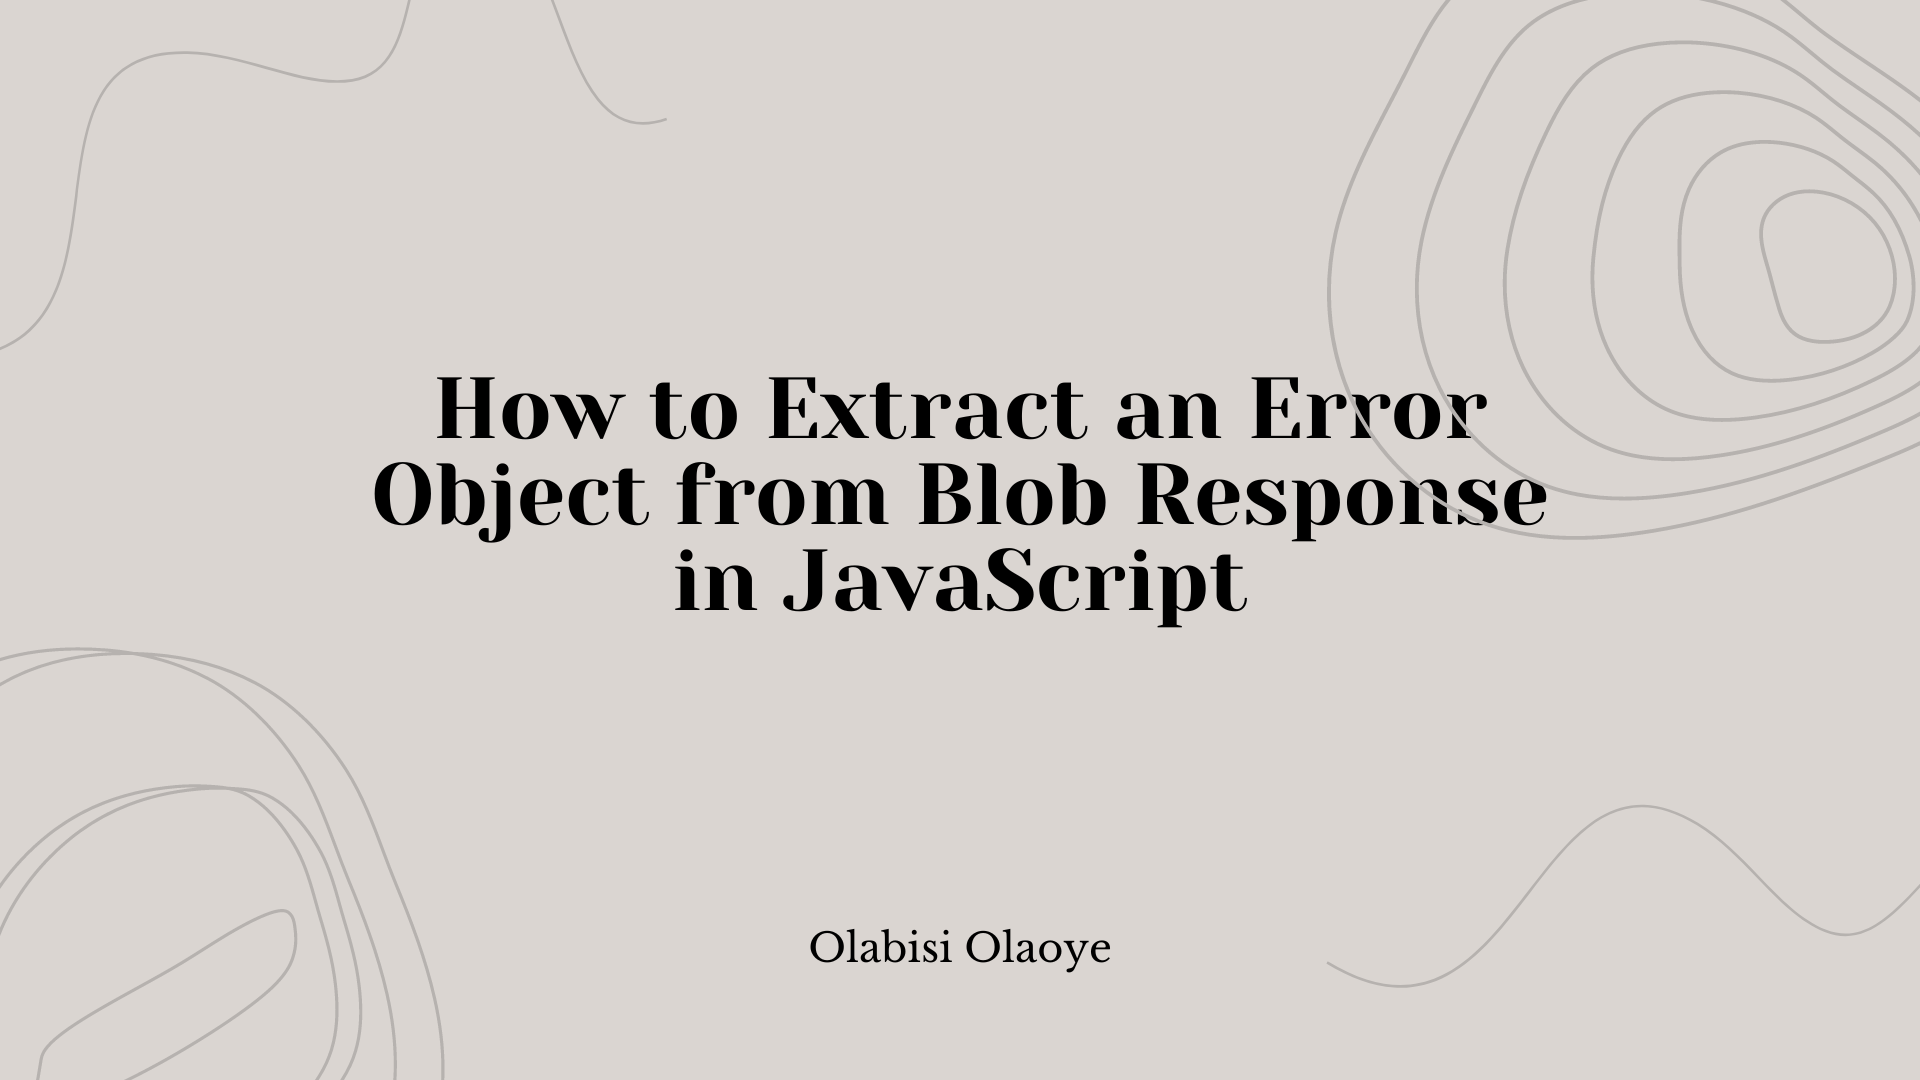 Image for How to Extract an Error Object from a Blob API Response in JavaScript